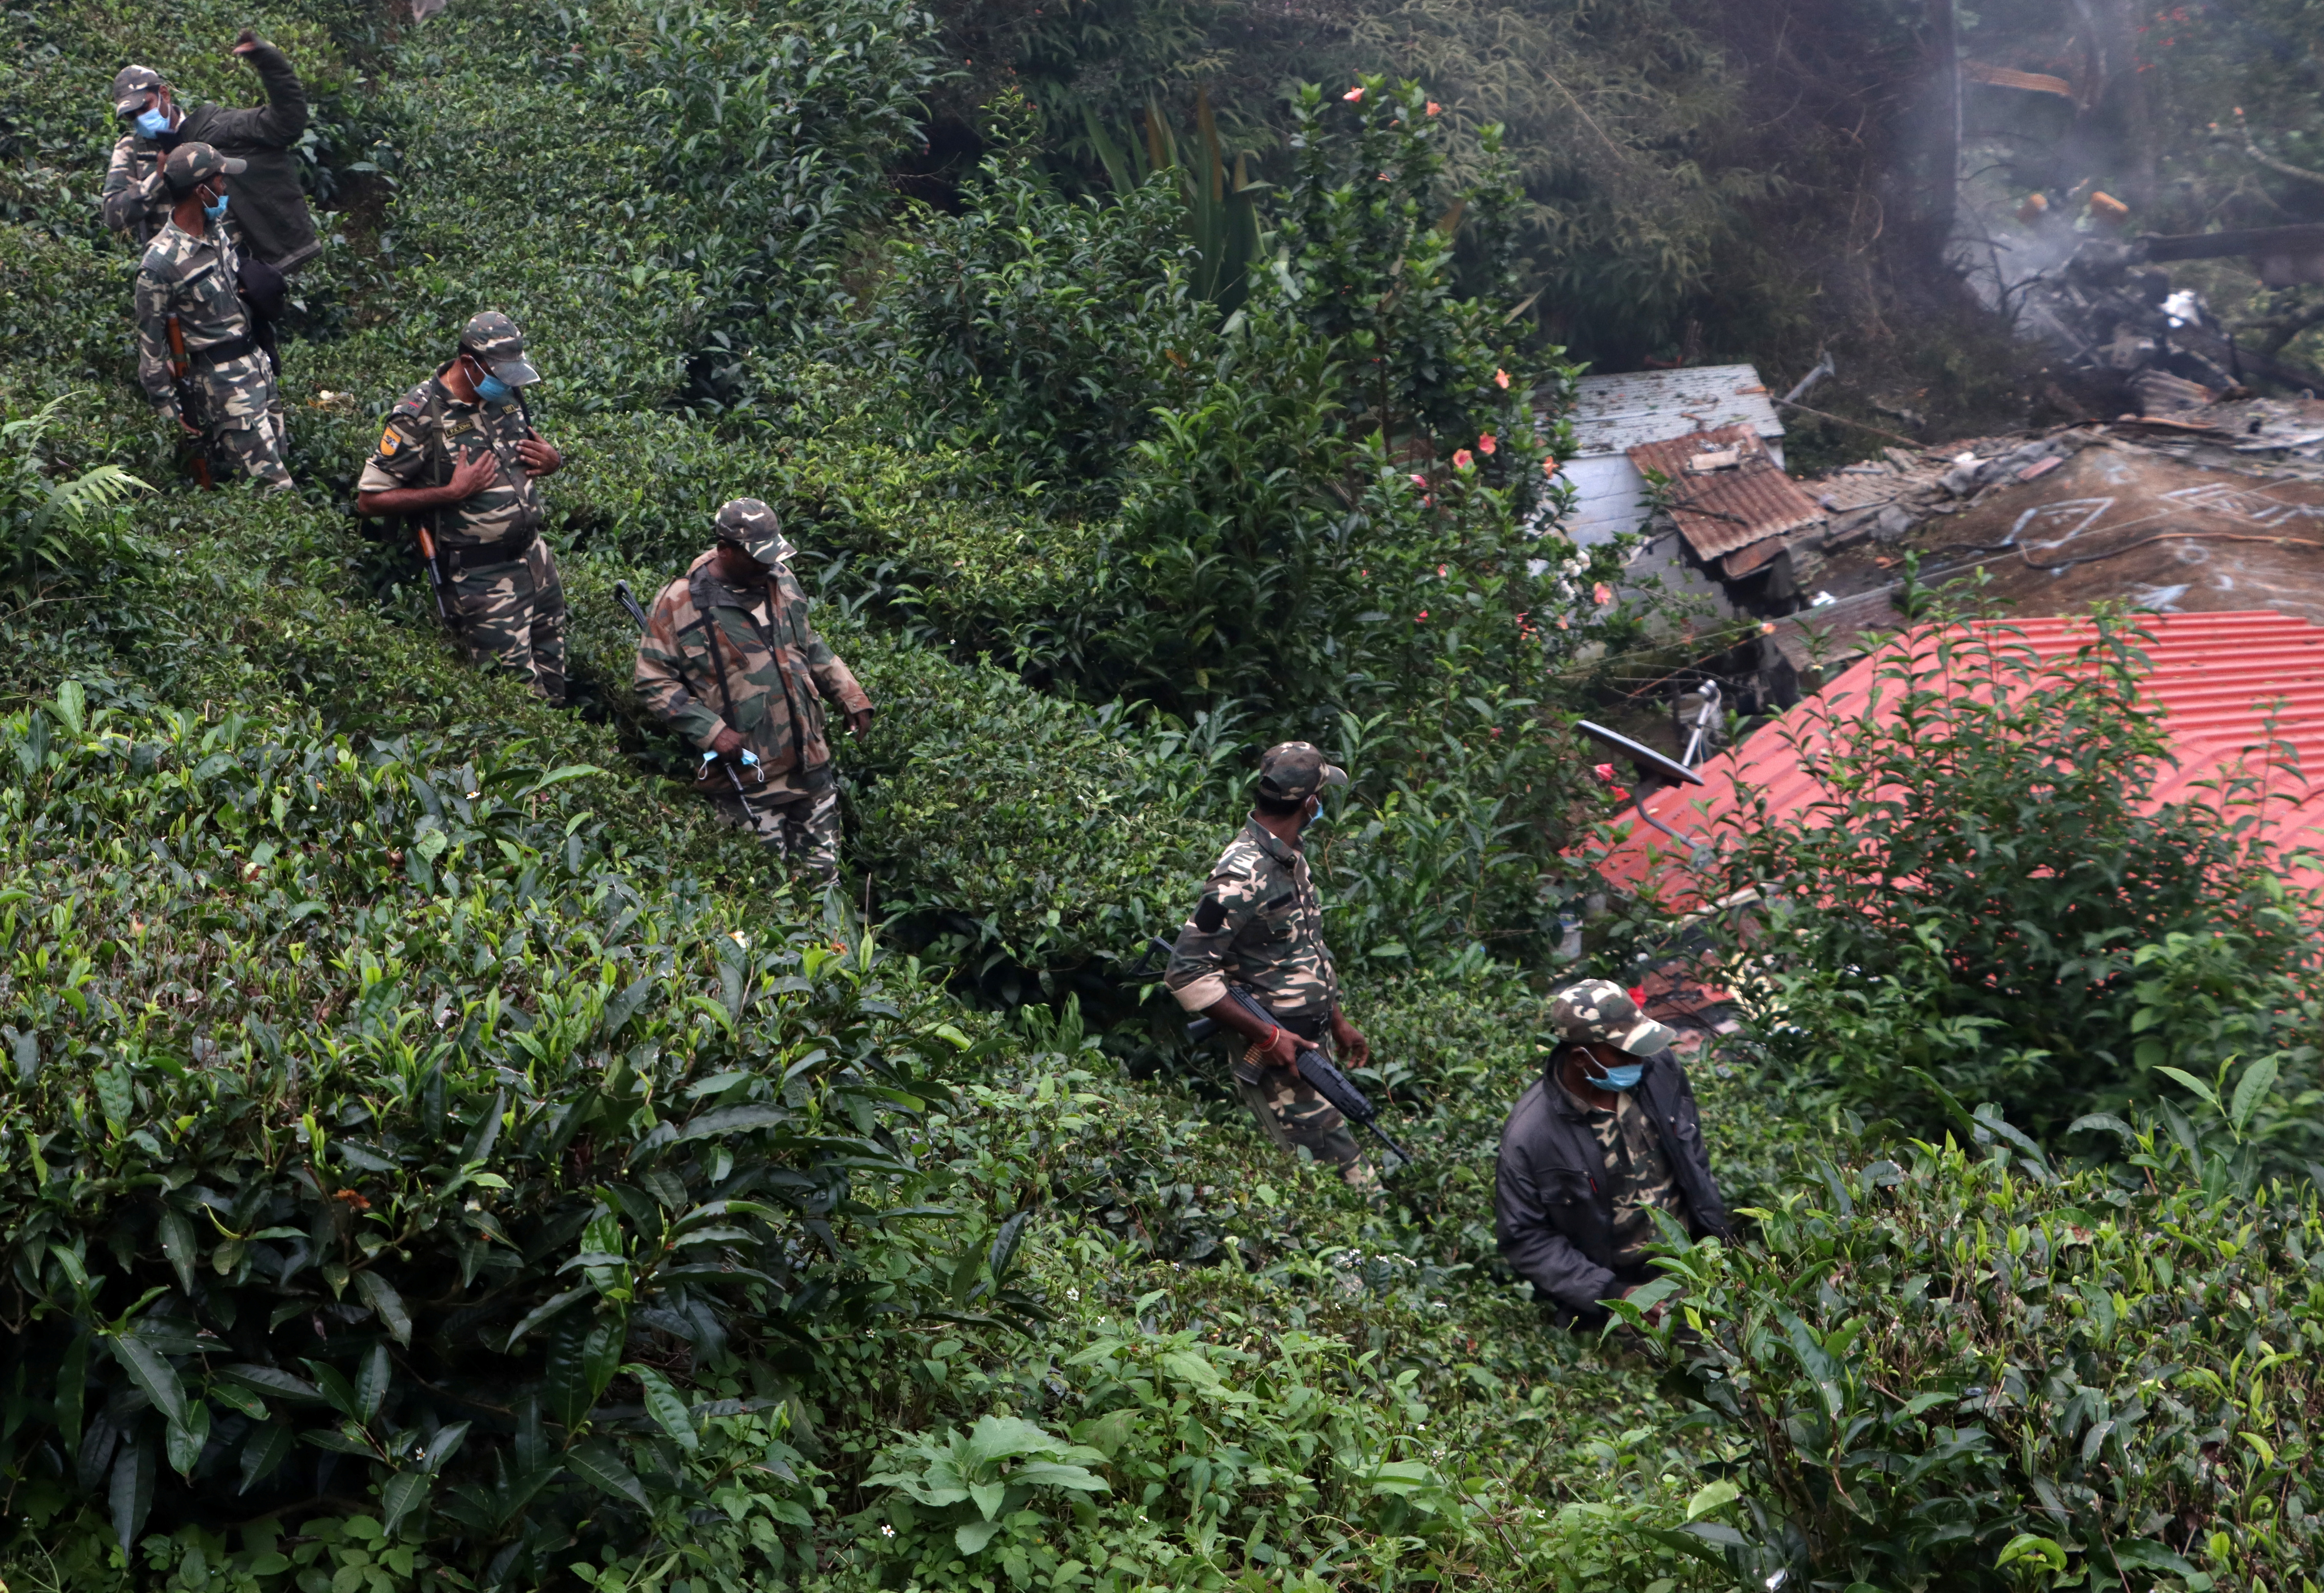 Security forces patrol past the debris of the Russian-made Mi-17V5 helicopter after it crashed near the town of Coonoor in the southern state of Tamil Nadu, India, December 8, 2021. REUTERS/Stringer